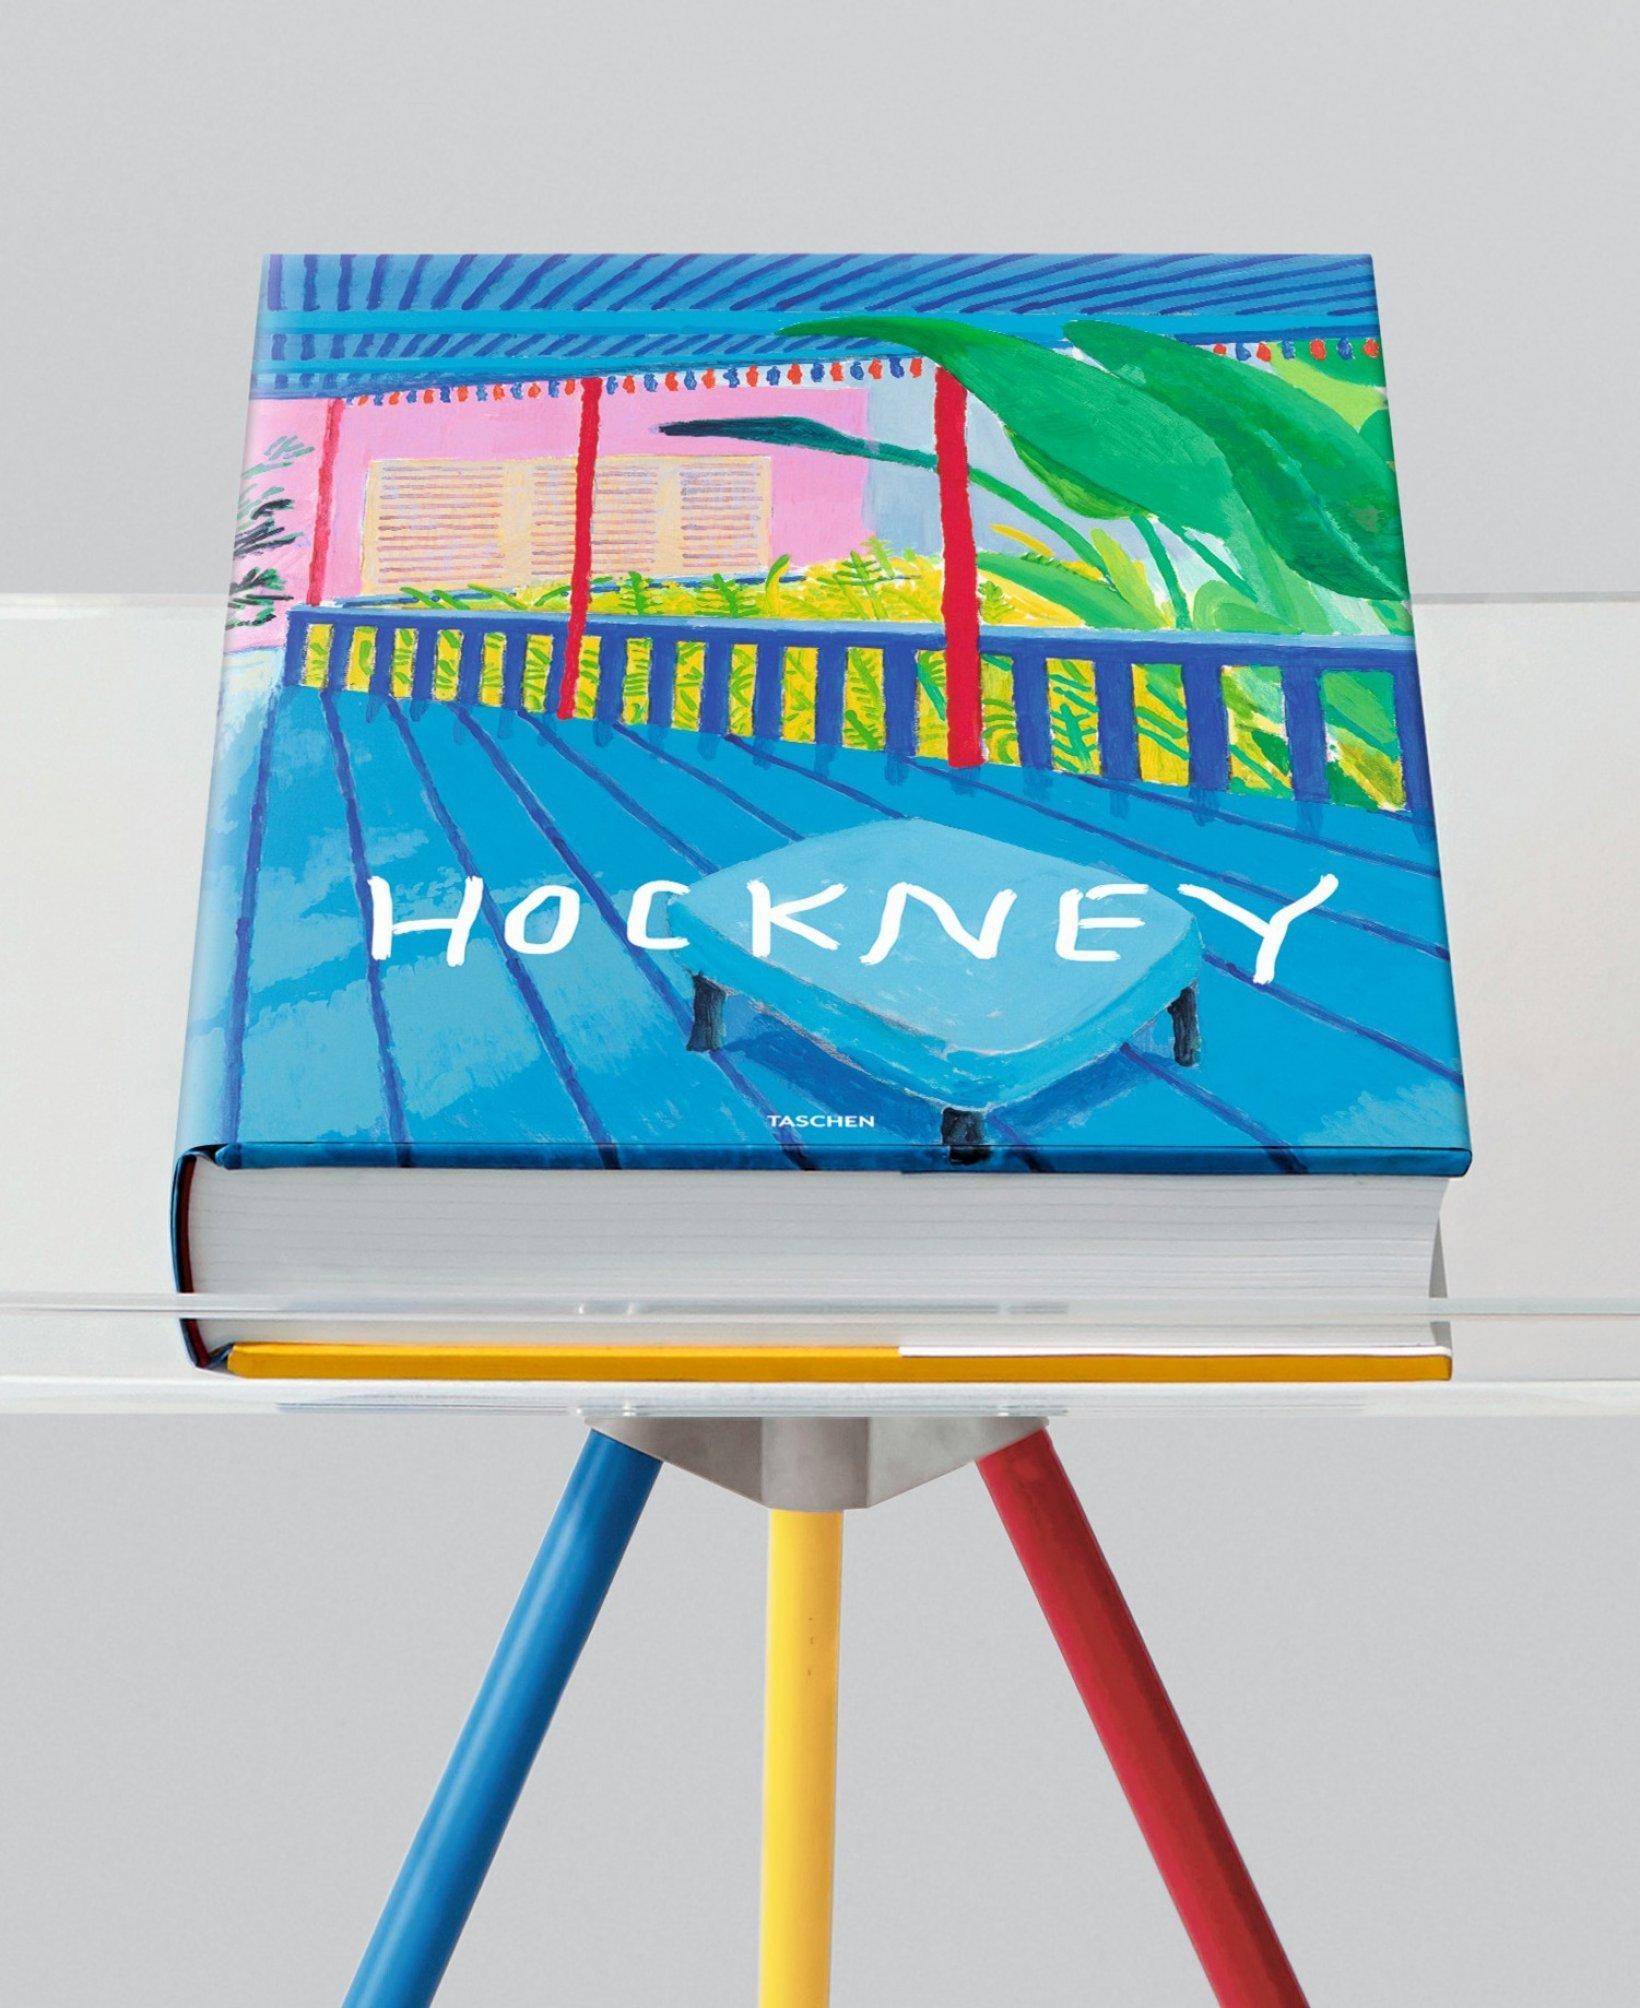  498 pages, illustrated in color, with 13 fold-outs. Folio, boards. Cologne, Taschen, 2016. 
Accompanied by a stand designed by Marc Newson. Limited edition of 9,000 copies, signed by Hockney. As new in the original shipping carton.